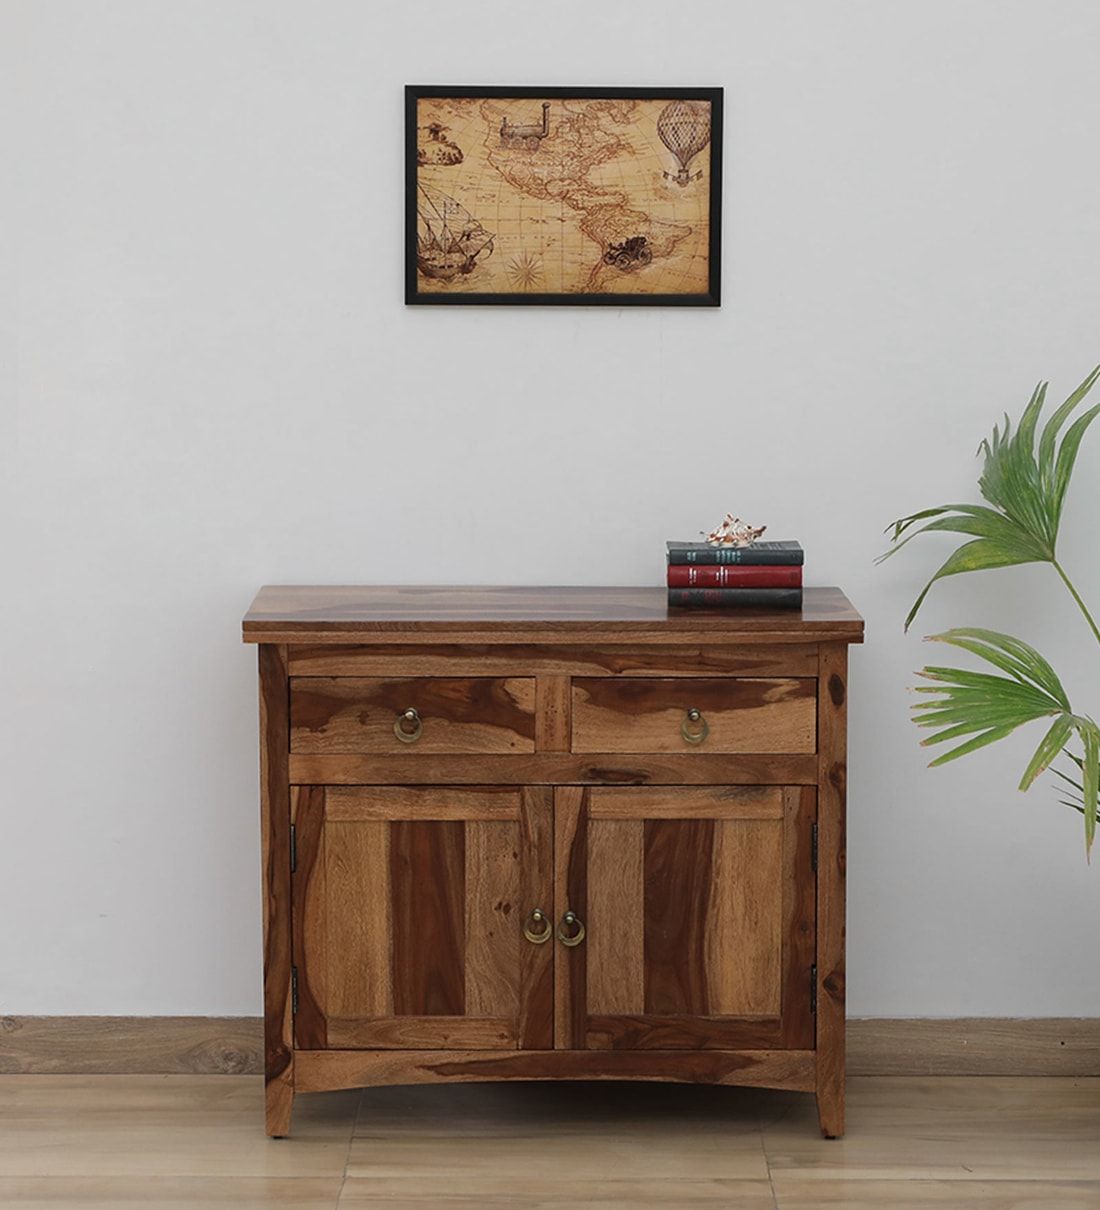 Buy Biscay Sheesham Wood Sideboard In Scratch Resistant Rustic Teak Finish Woodsworth From Pepperfry | Pepperfry Intended For Recent Sideboards With Breathable Mesh Doors (View 7 of 15)